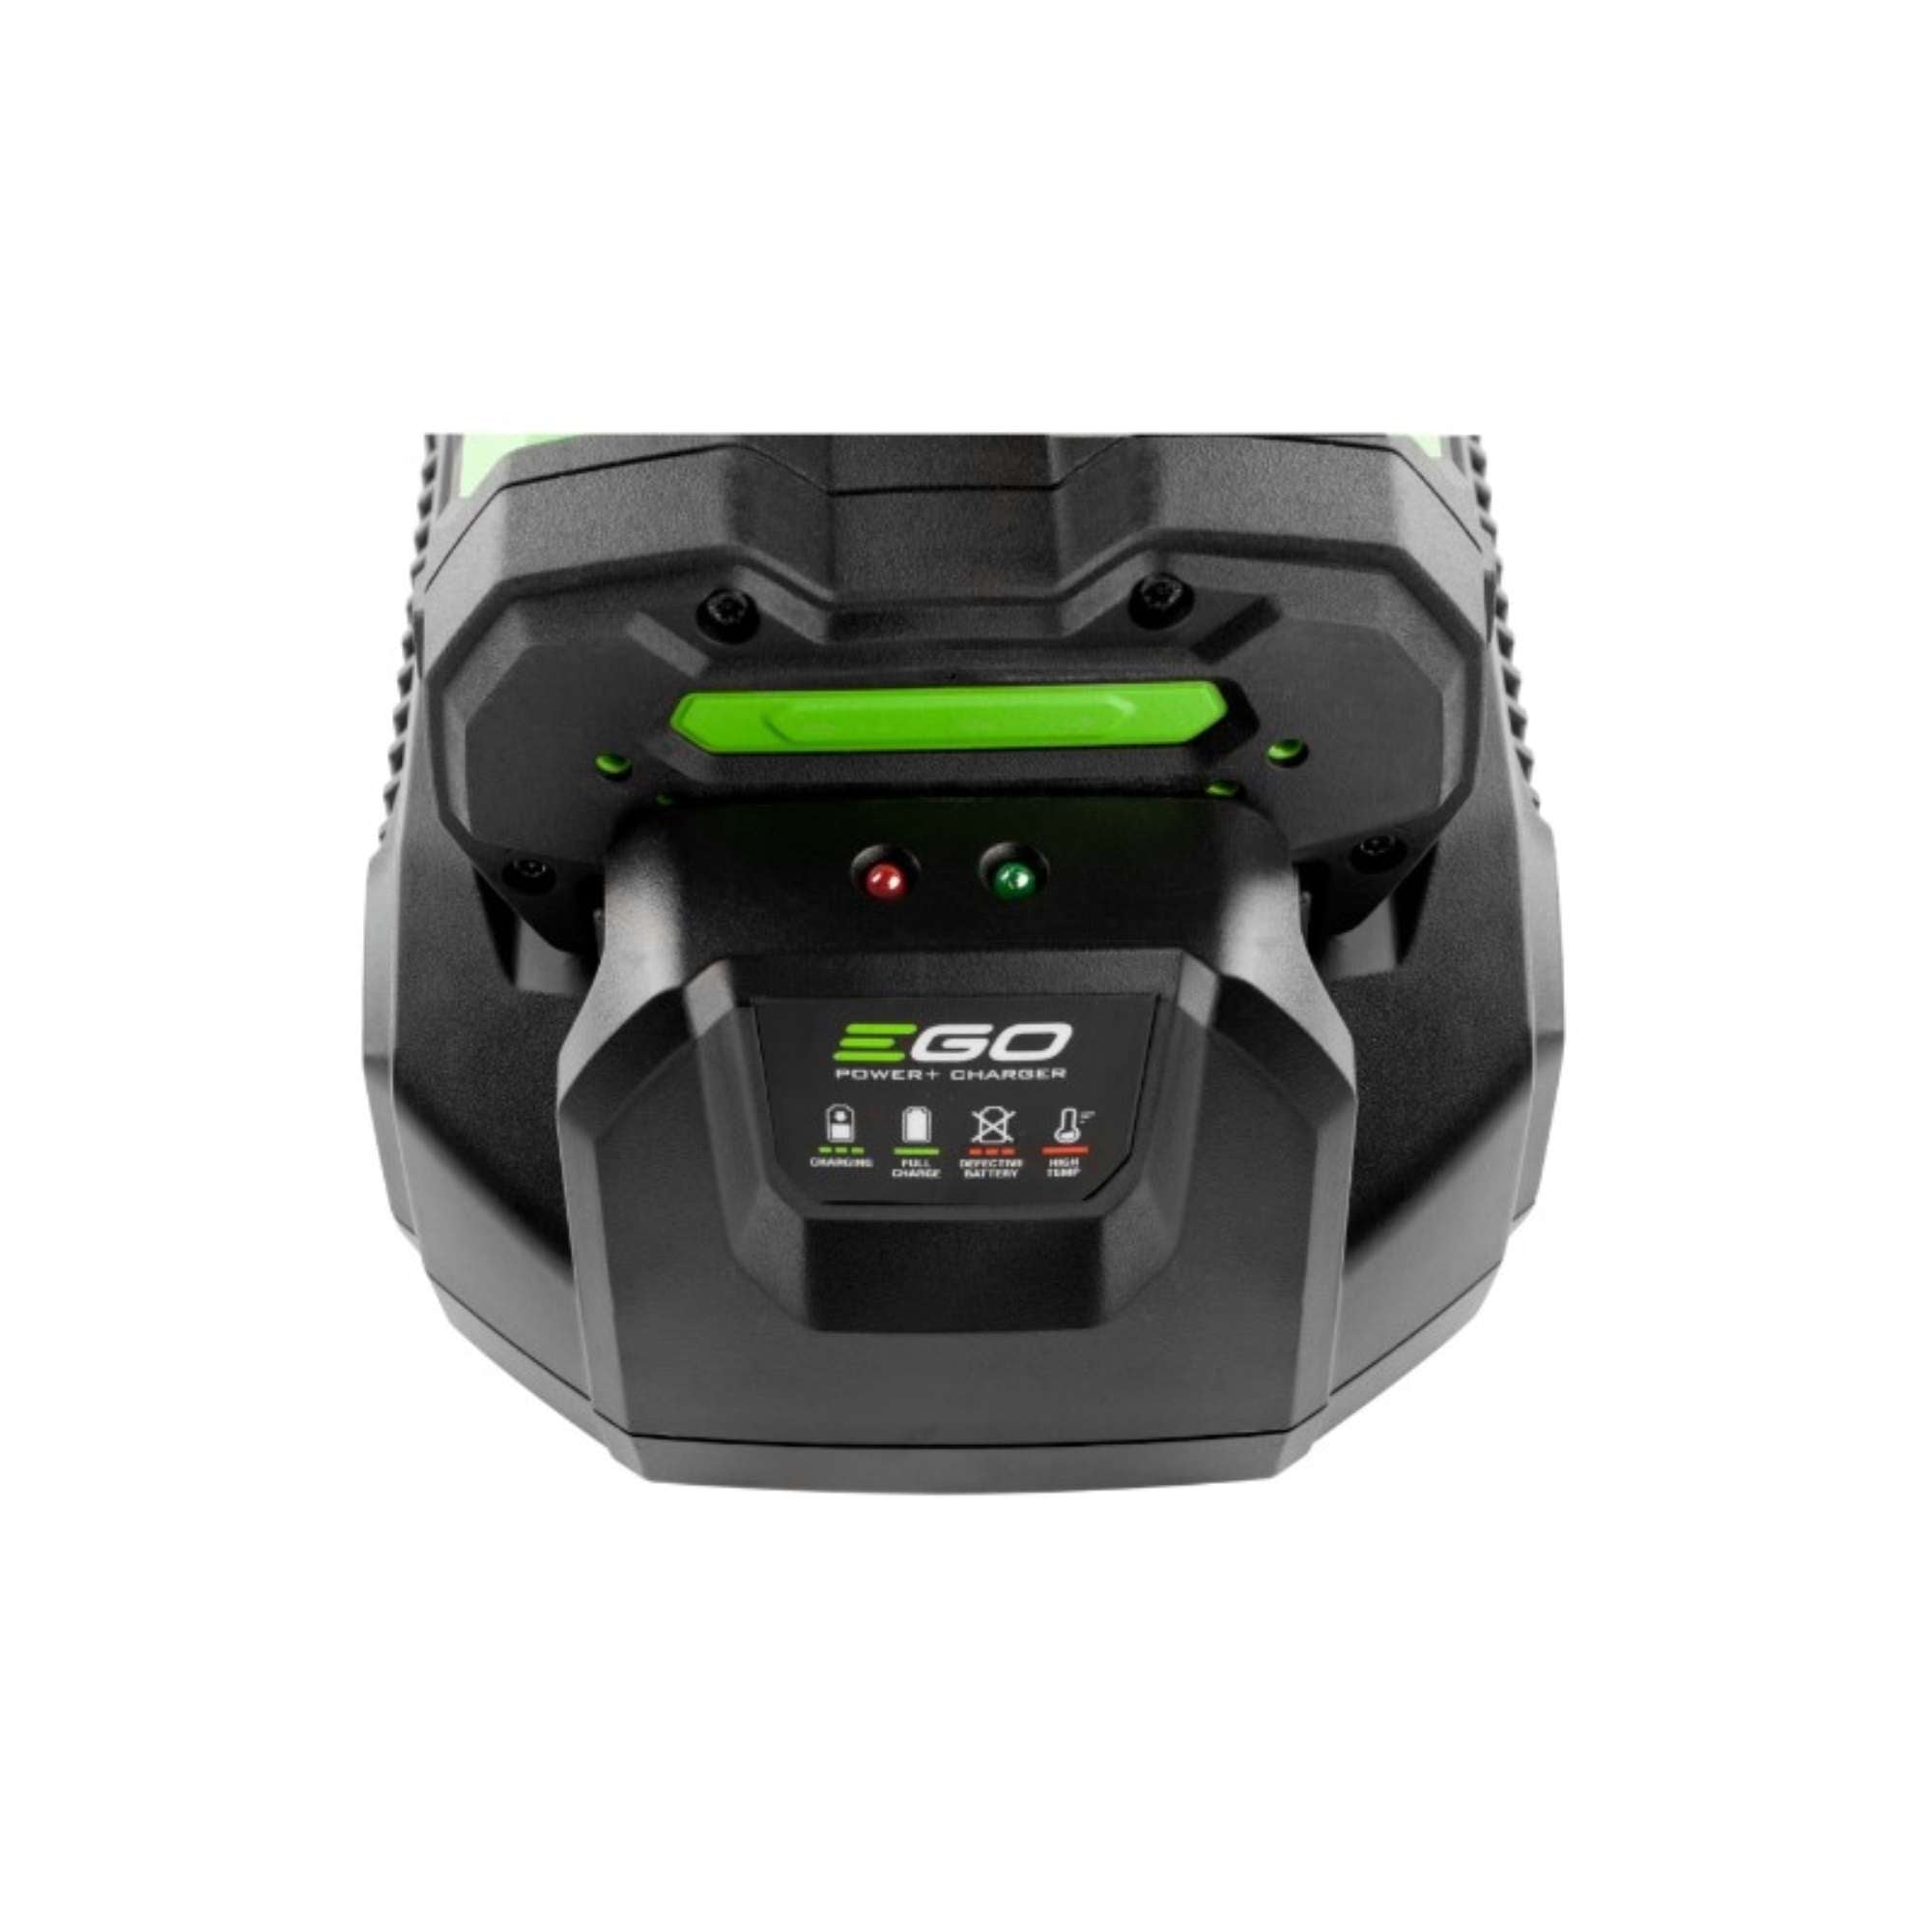 Standard 40min charger - Ego 28104 CH2100E